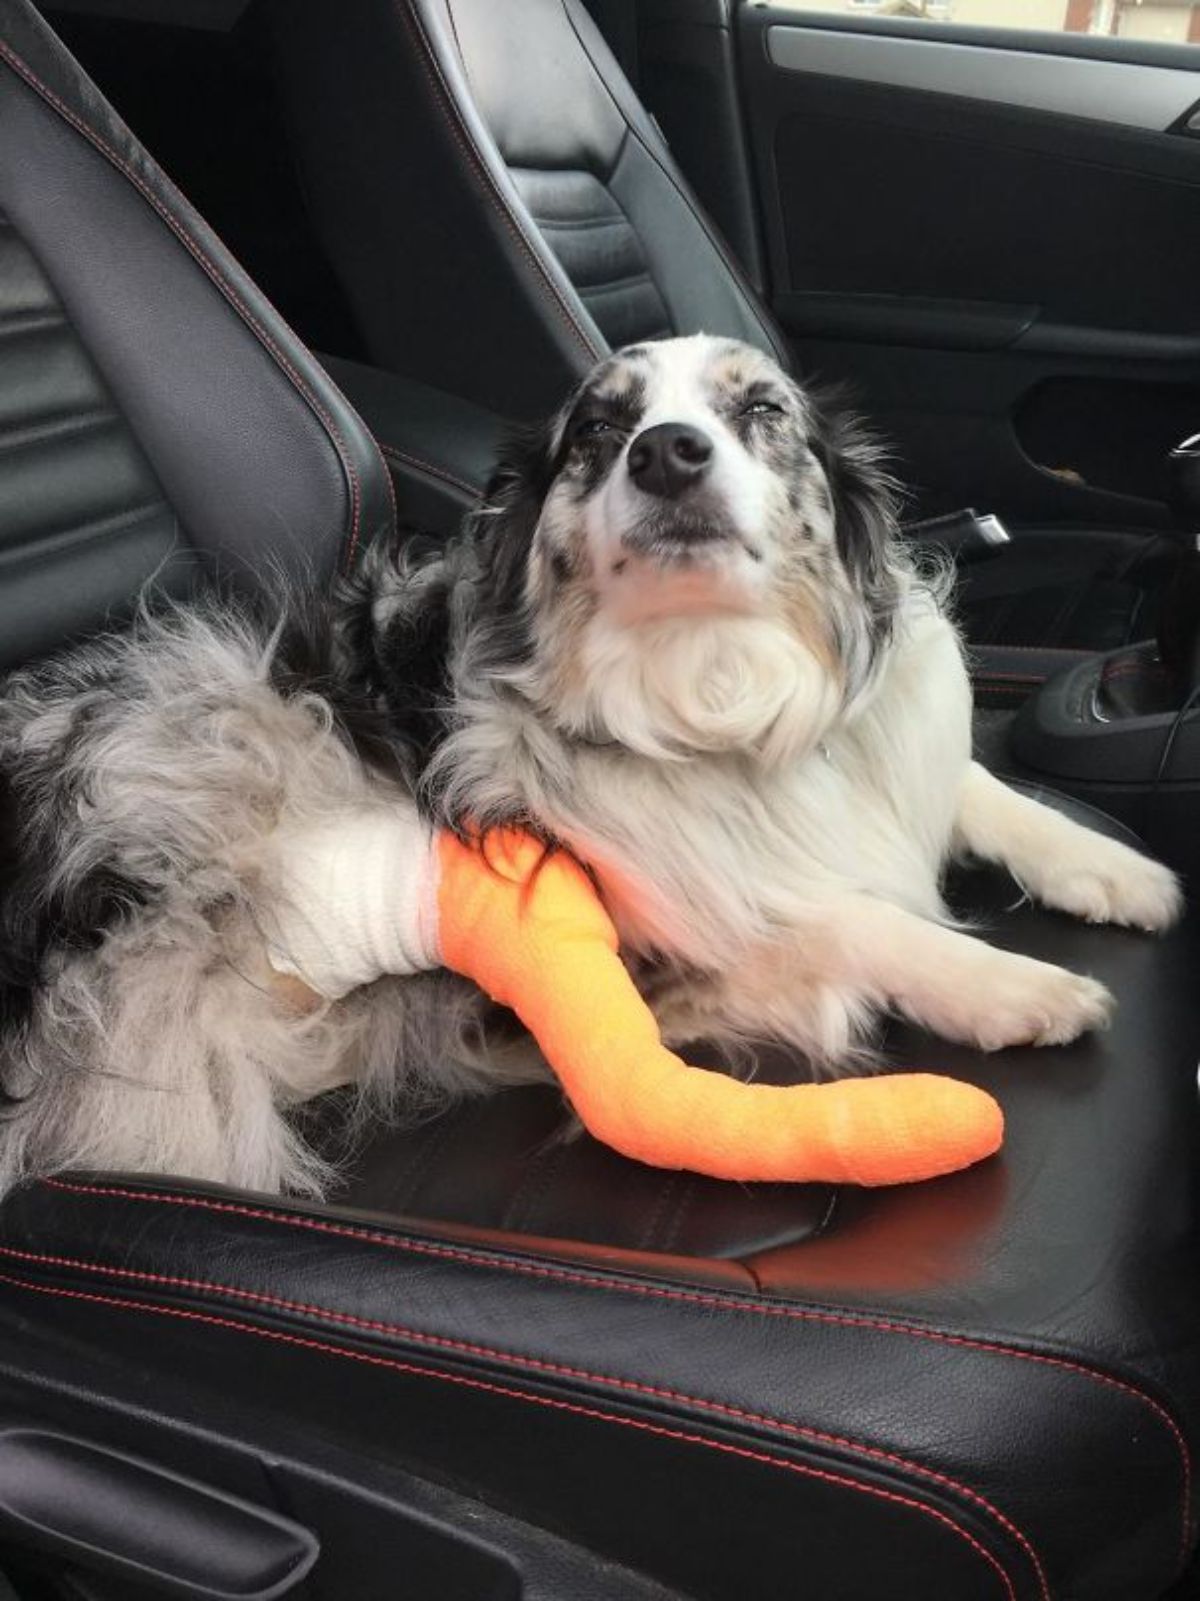 fluffy white and black dog laying on a car seat with an orange cast on a back leg